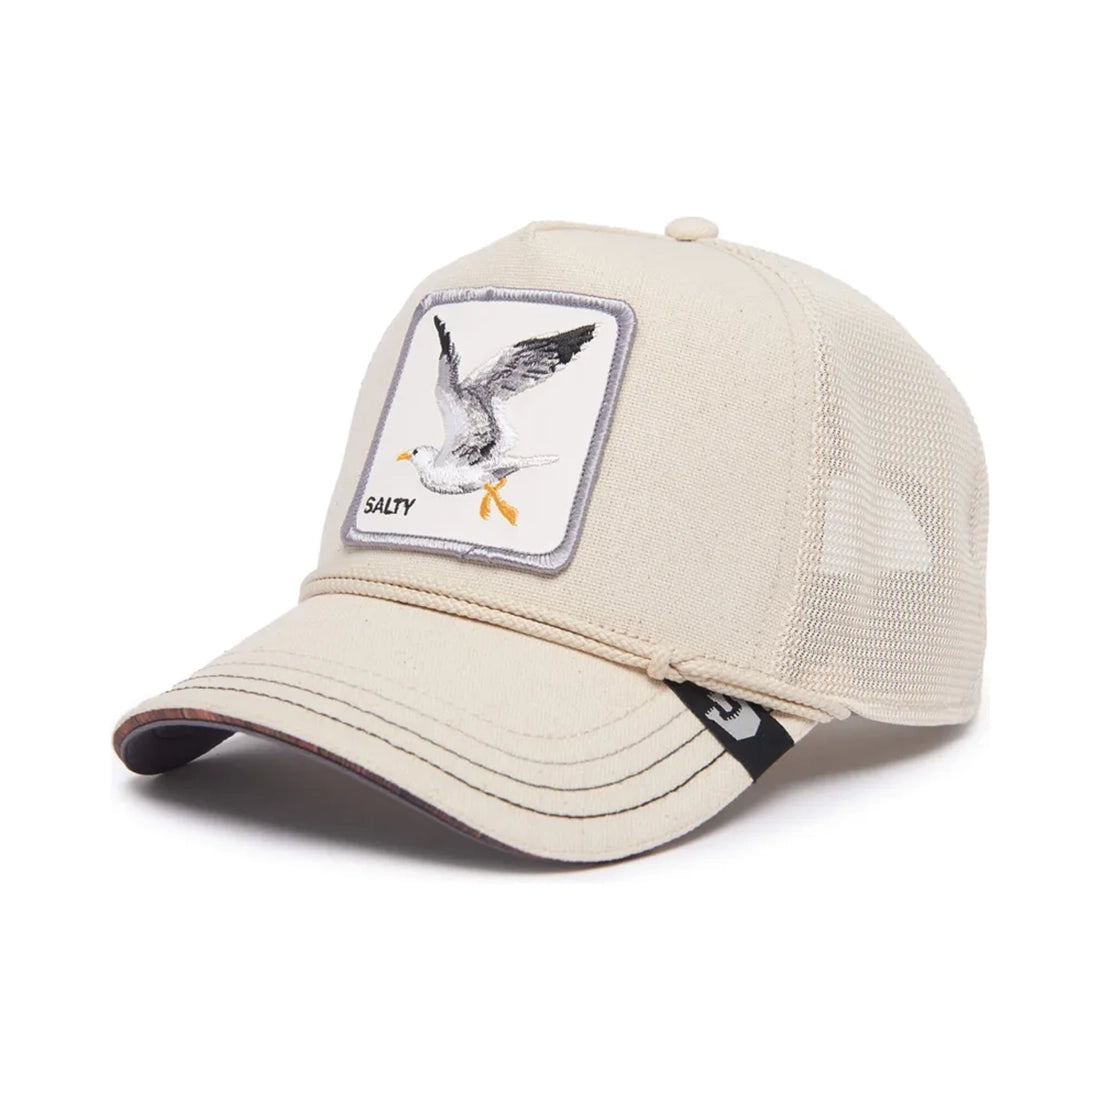 'Goorin Bros. Meal Ticket Trucker Hat' in 'Natural' colour